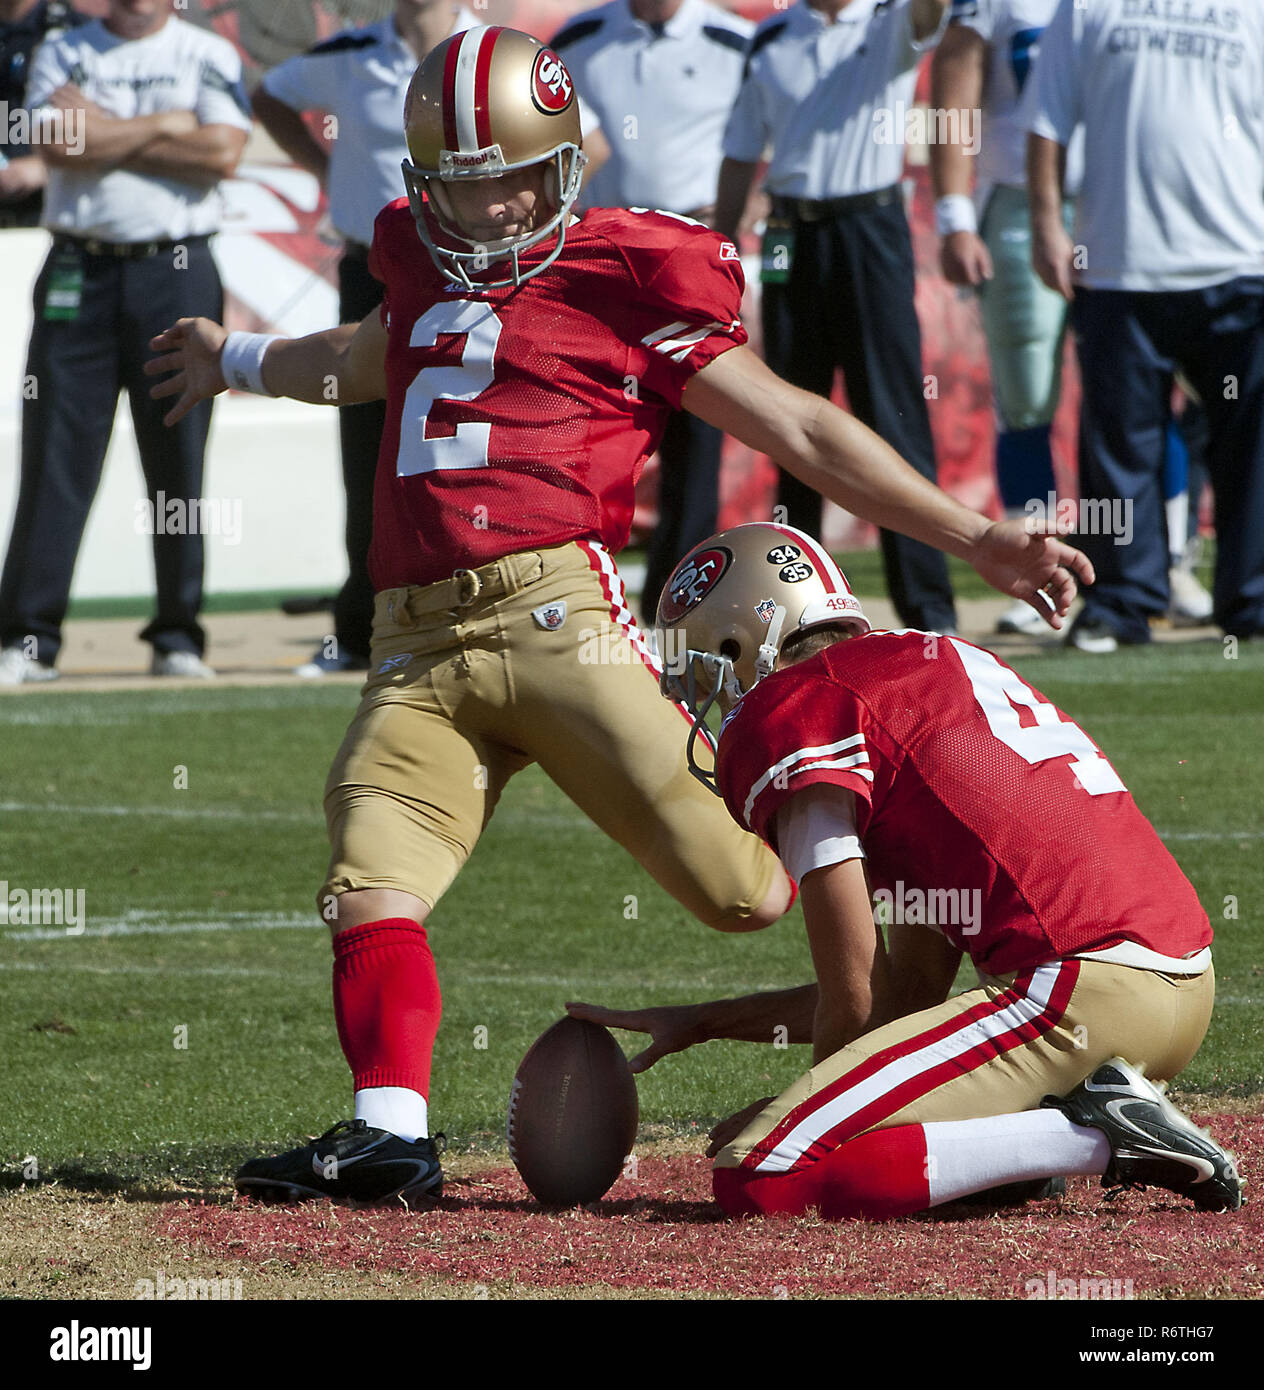 San Francisco, California, USA. 18th Sep, 2011. With San Francisco 49ers punter Andy Lee (4) holding kicker David Akers (2) kicks 55 yard field goal on Sunday, September 18, 2011 at Candlestick Park, San Francisco, California. Cowboys defeated the 49ers in overtime 27-24. Credit: Al Golub/ZUMA Wire/Alamy Live News Stock Photo